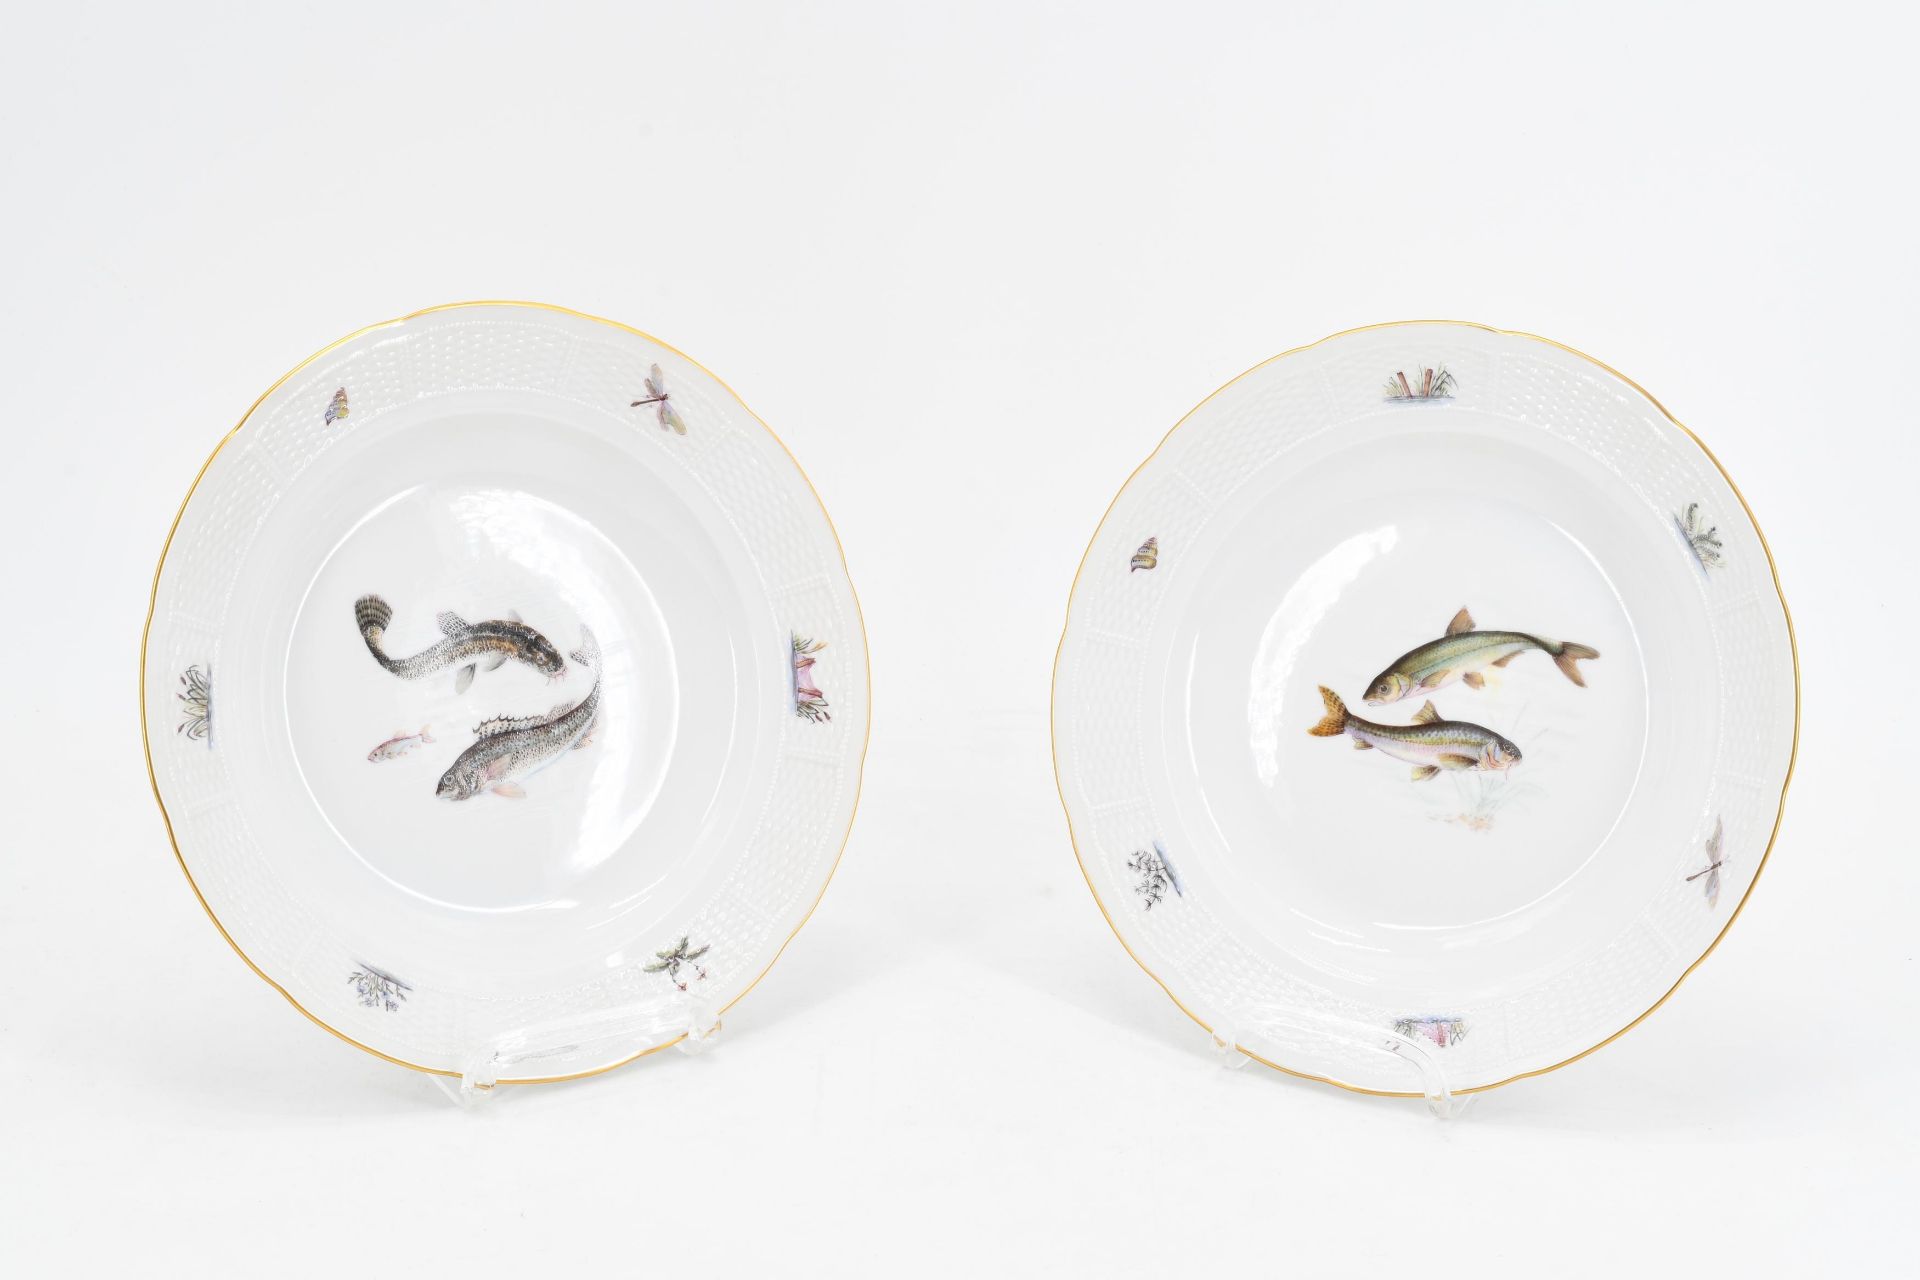 Dinner service with fish decor for 6 persons - Image 14 of 27